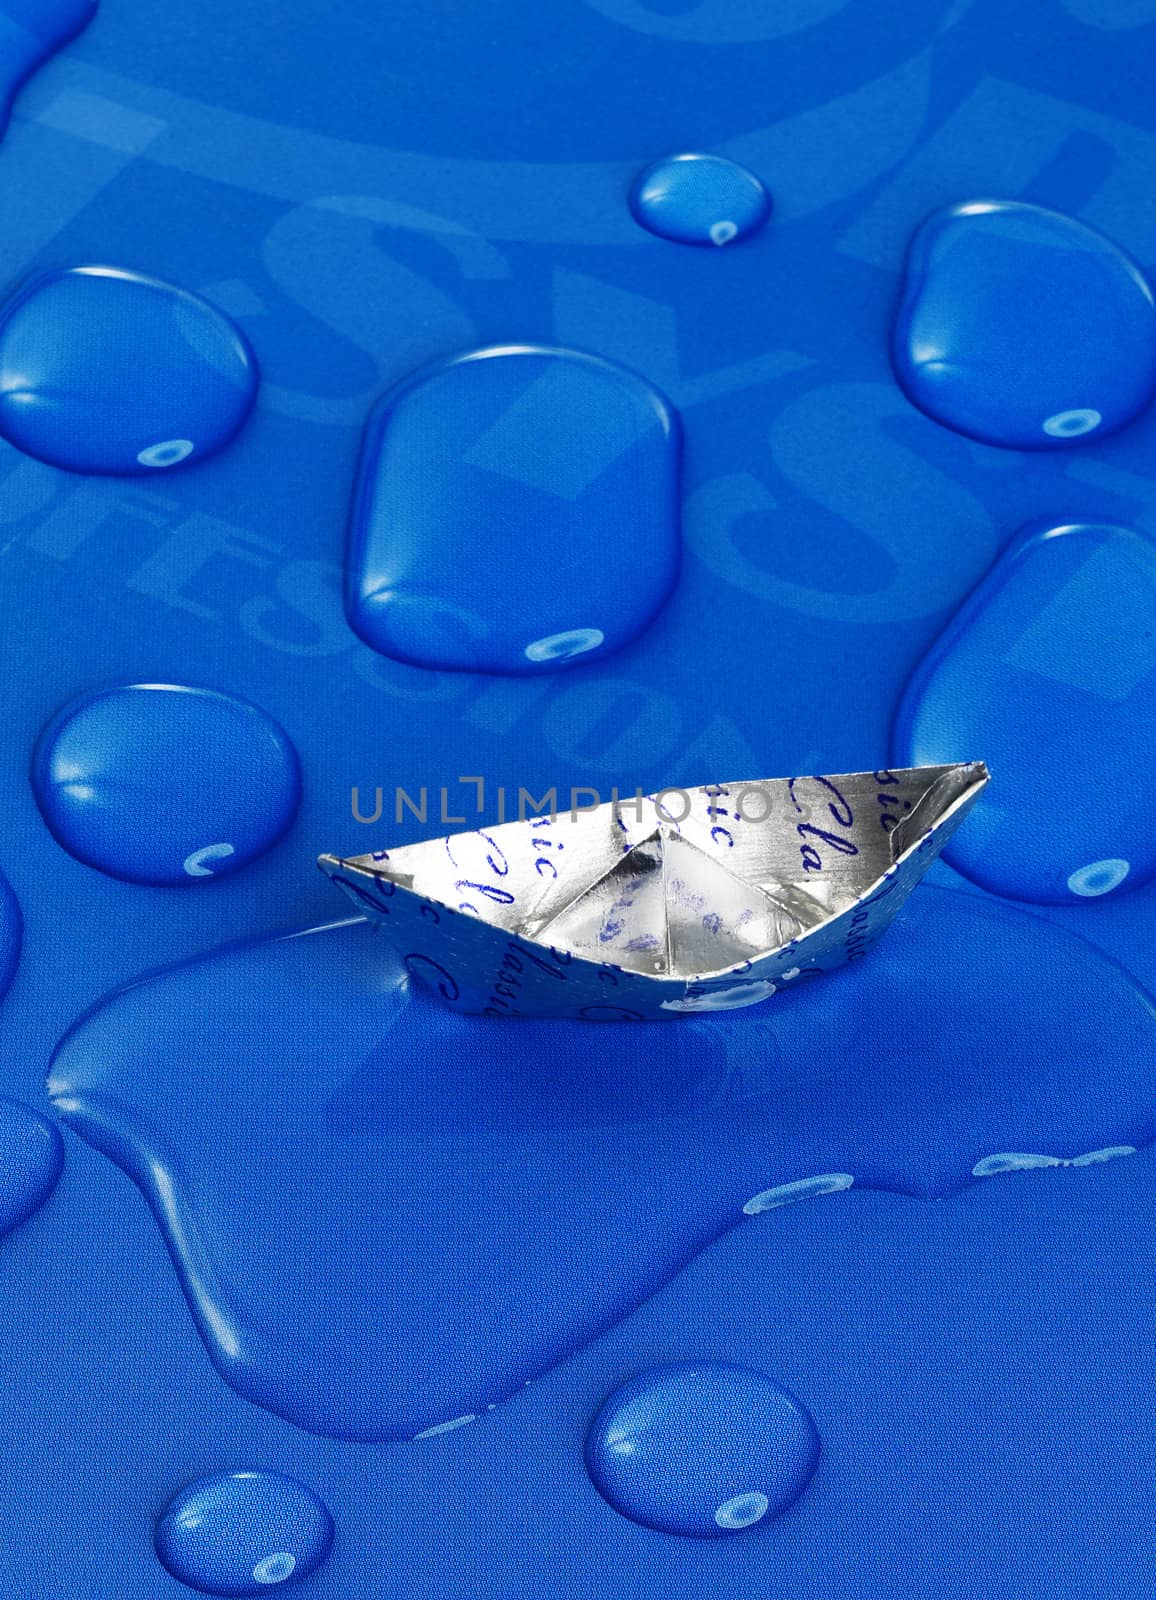 paper boat floating on water drops ,over blue background